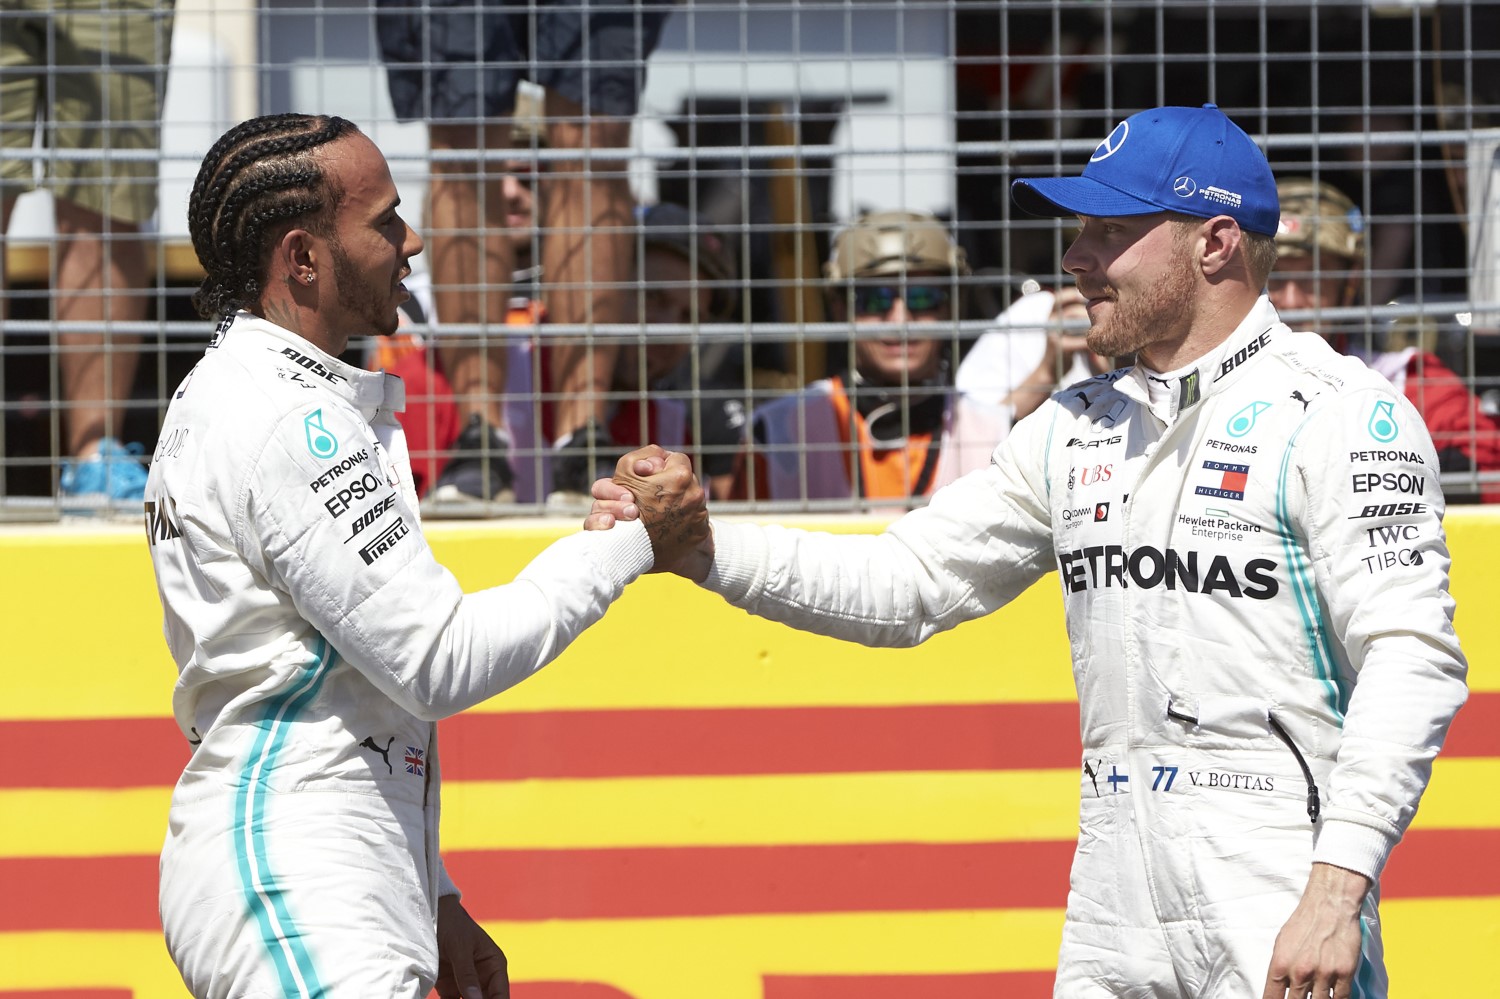 Hamilton and Bottas agree their Mercedes cars cannot be beaten